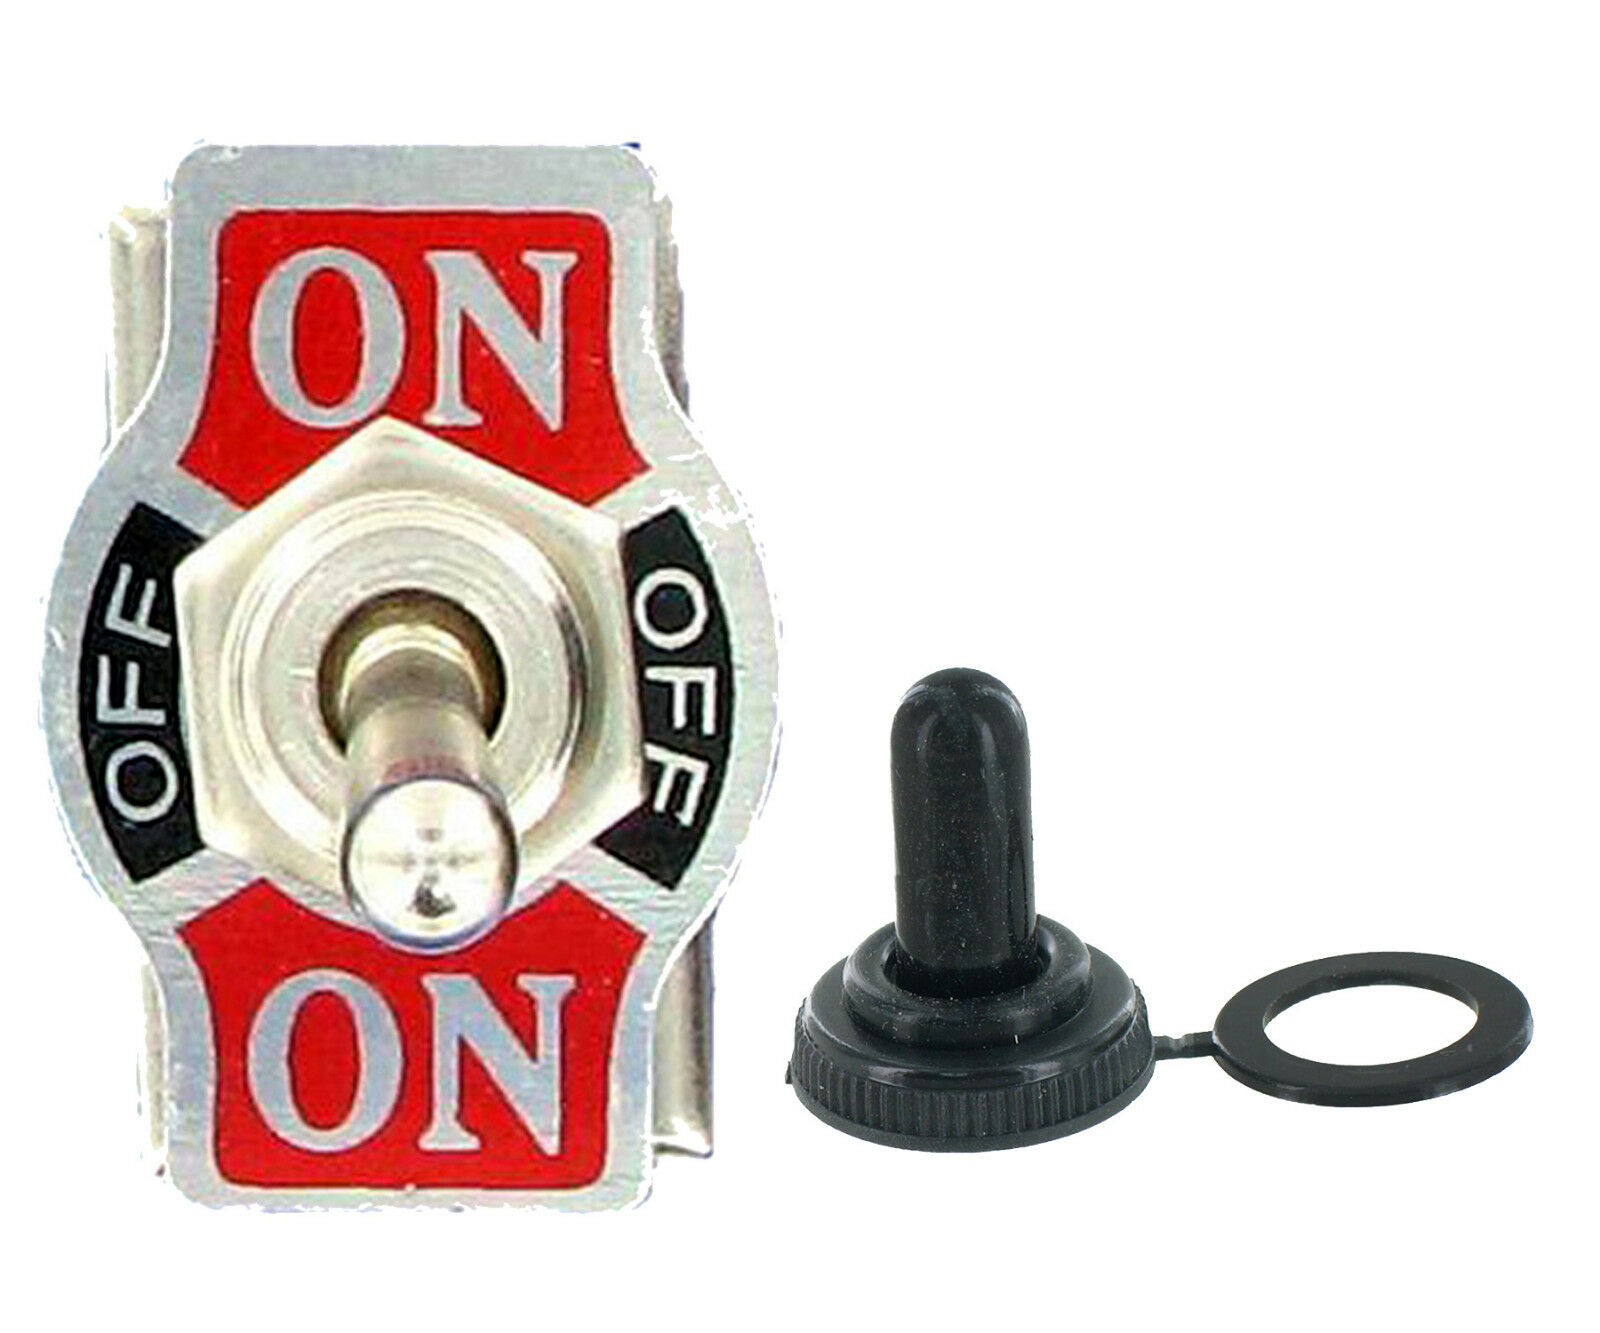 Heavy Duty 20a 125v Dpdt 3 Position 6 Terminal On/off/on Toggle Switch With Boot